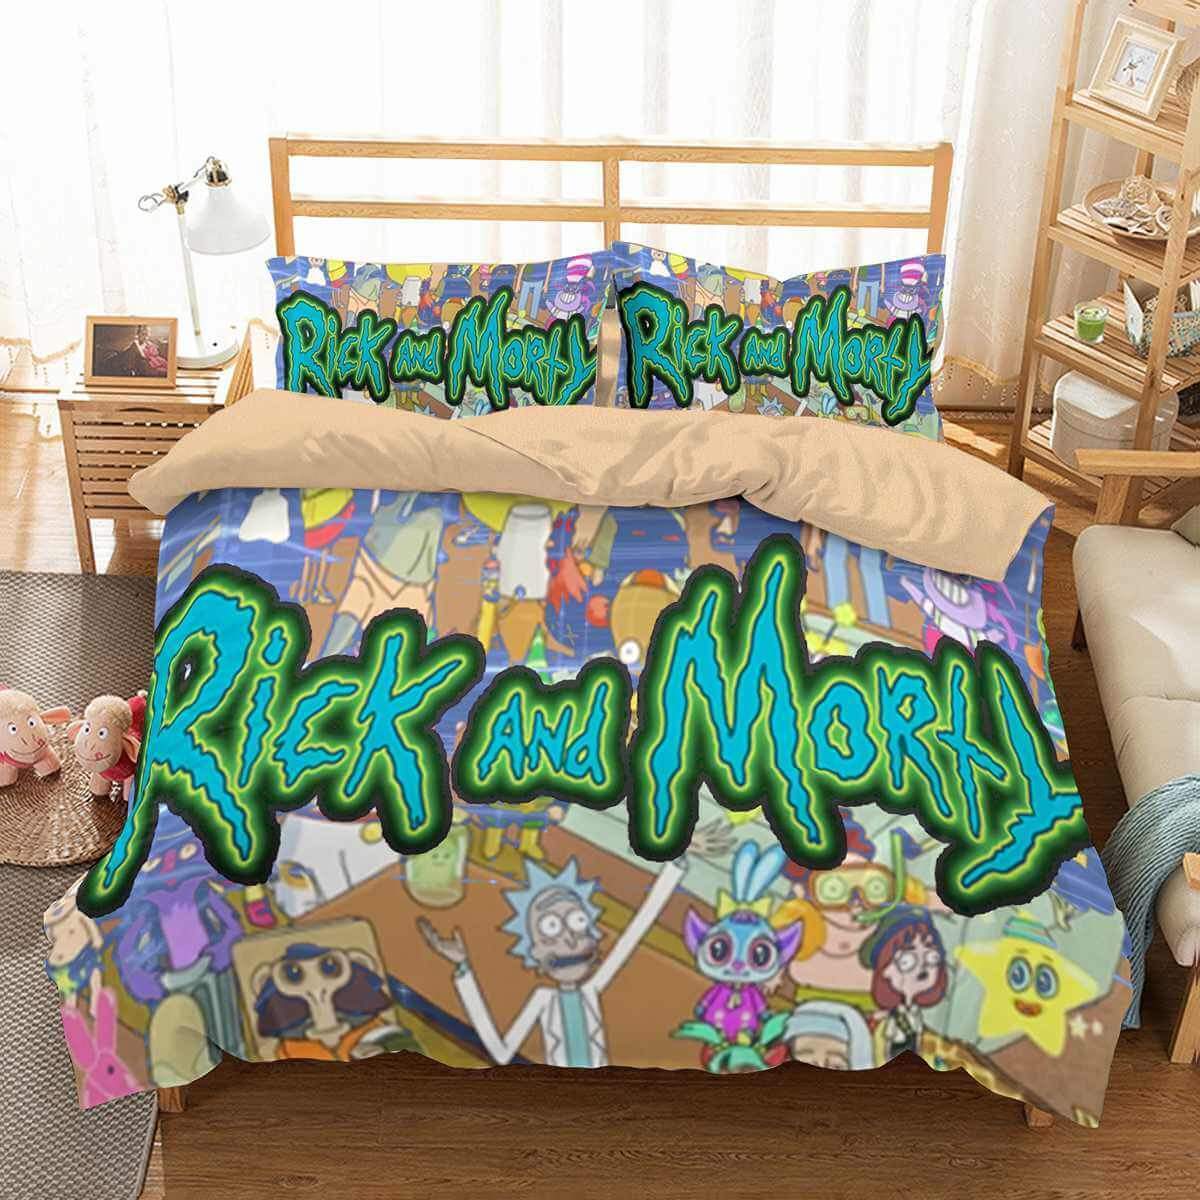 experience a mad scientist with rick and morty duvet cover bedding set 1682876767697